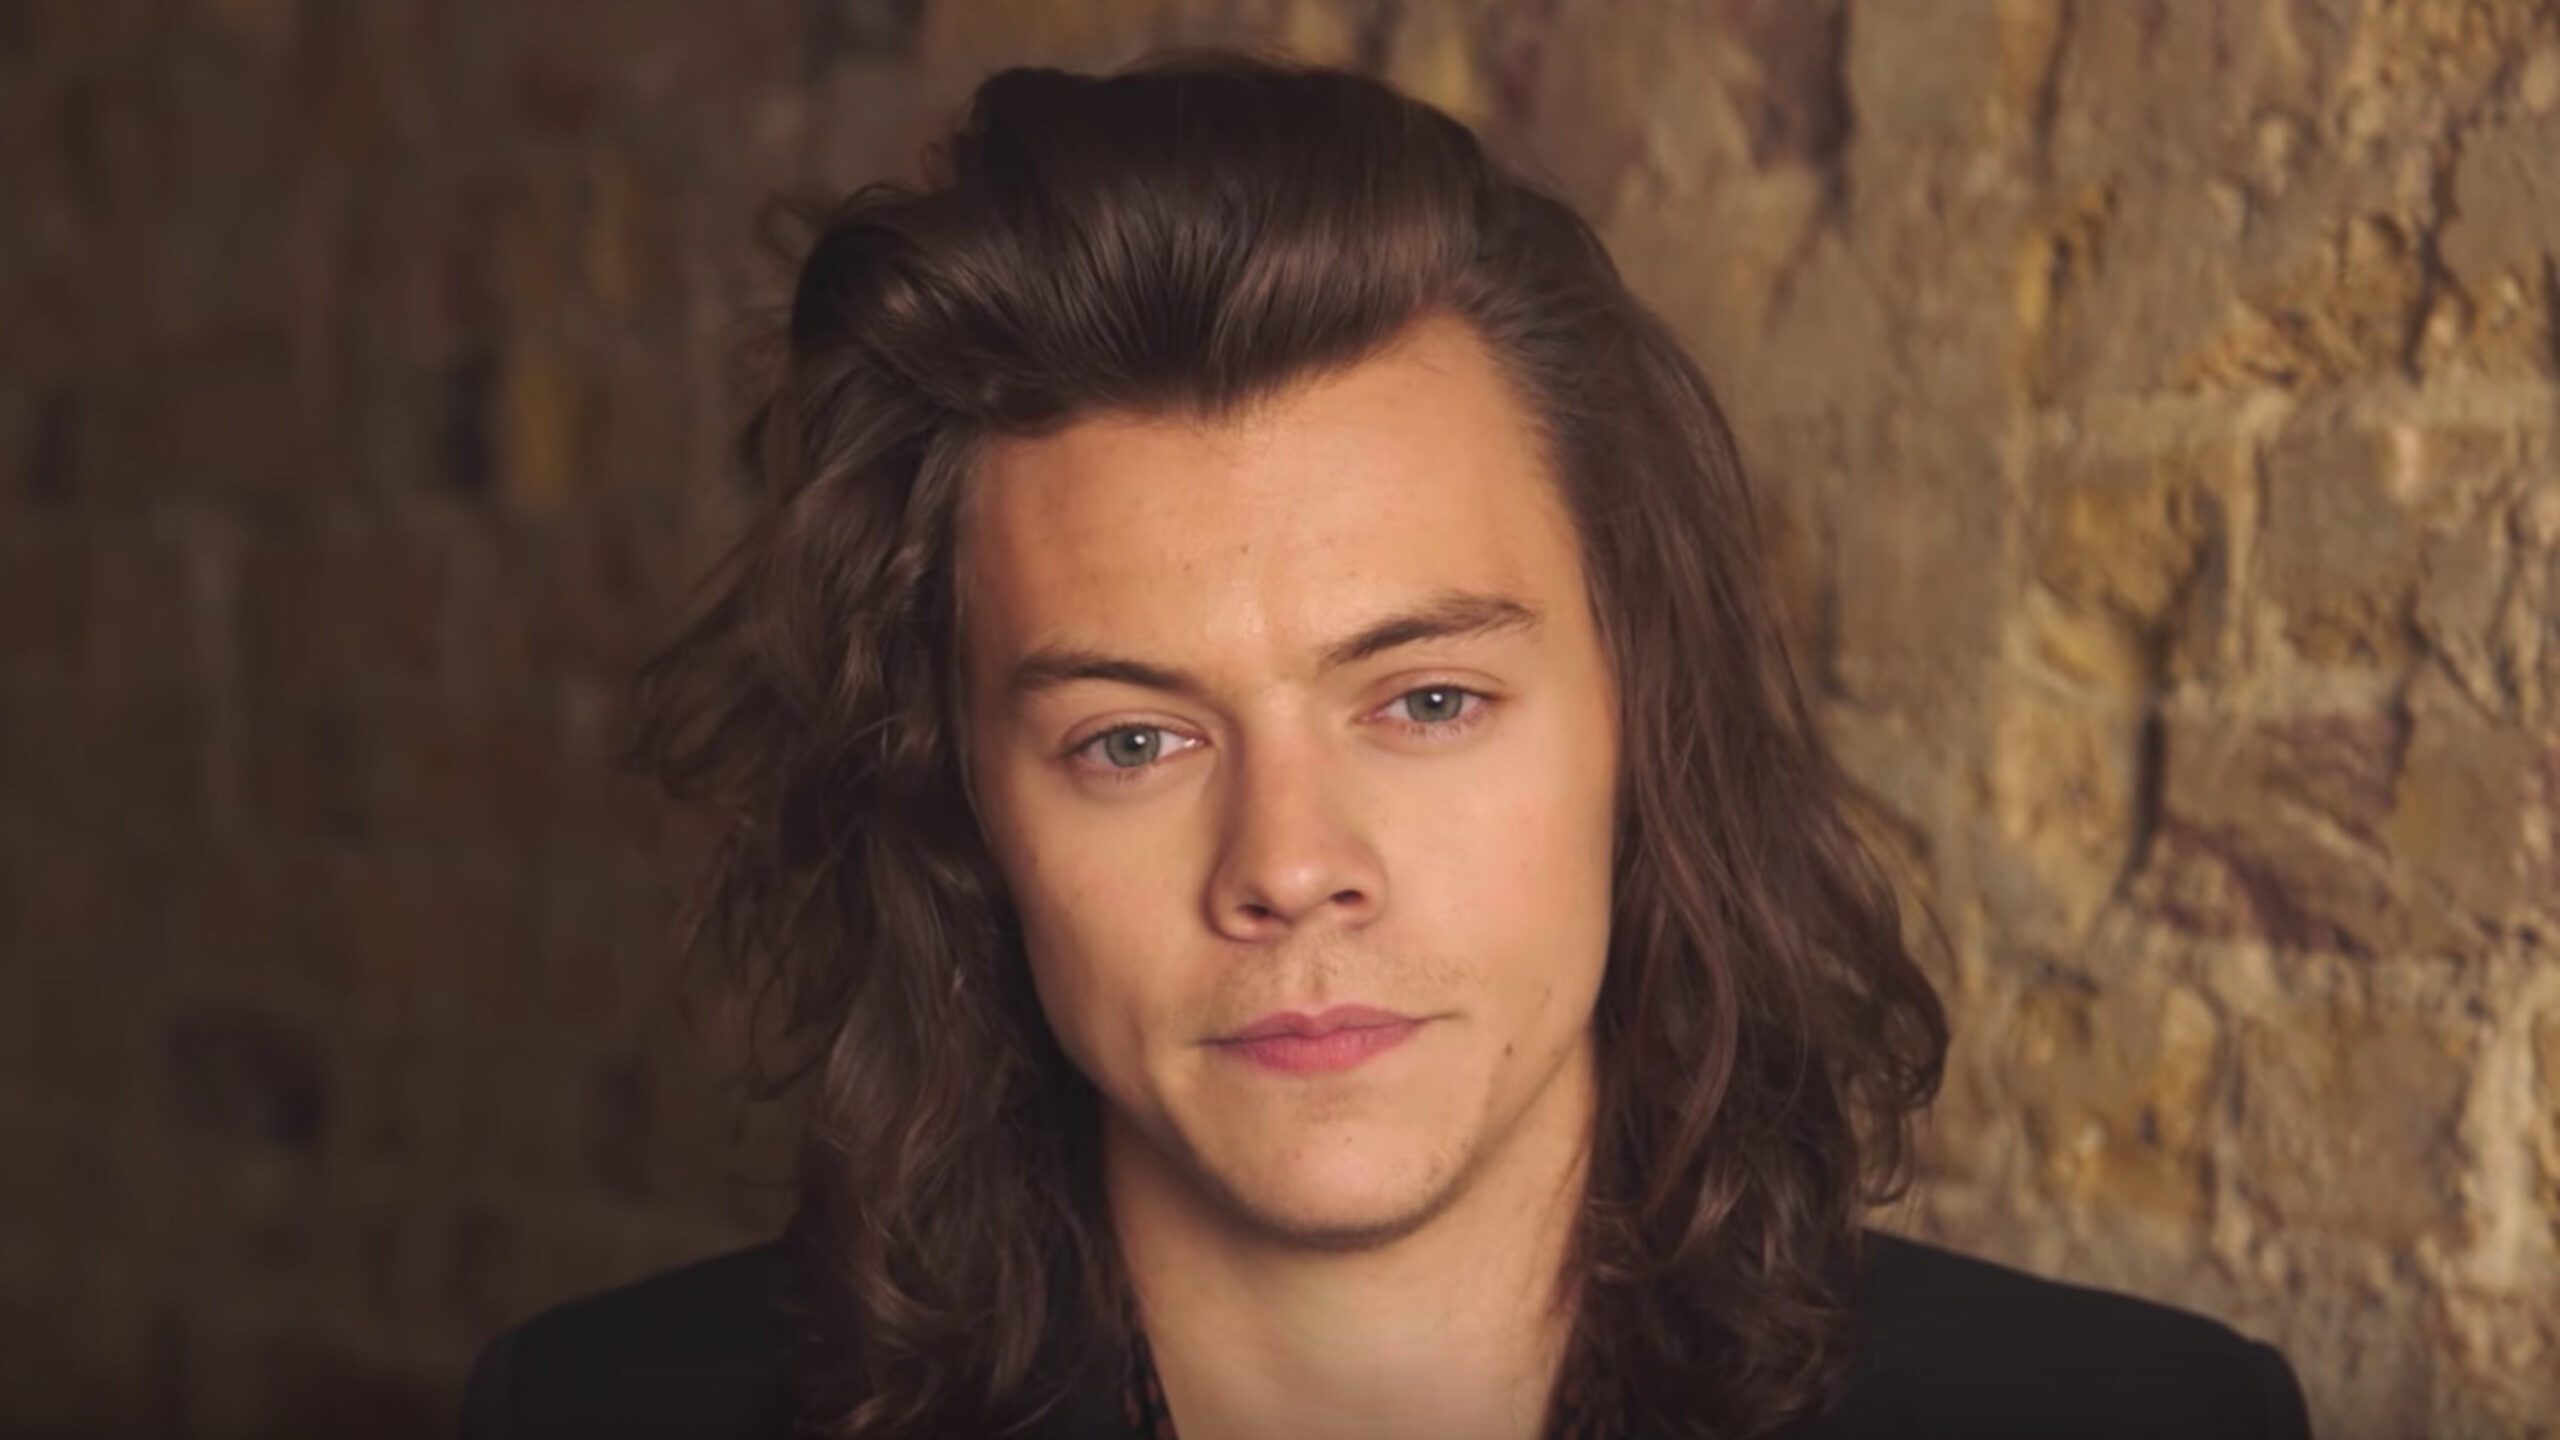 LISTEN: Harry Styles releases first solo single, ‘Sign of the Times’